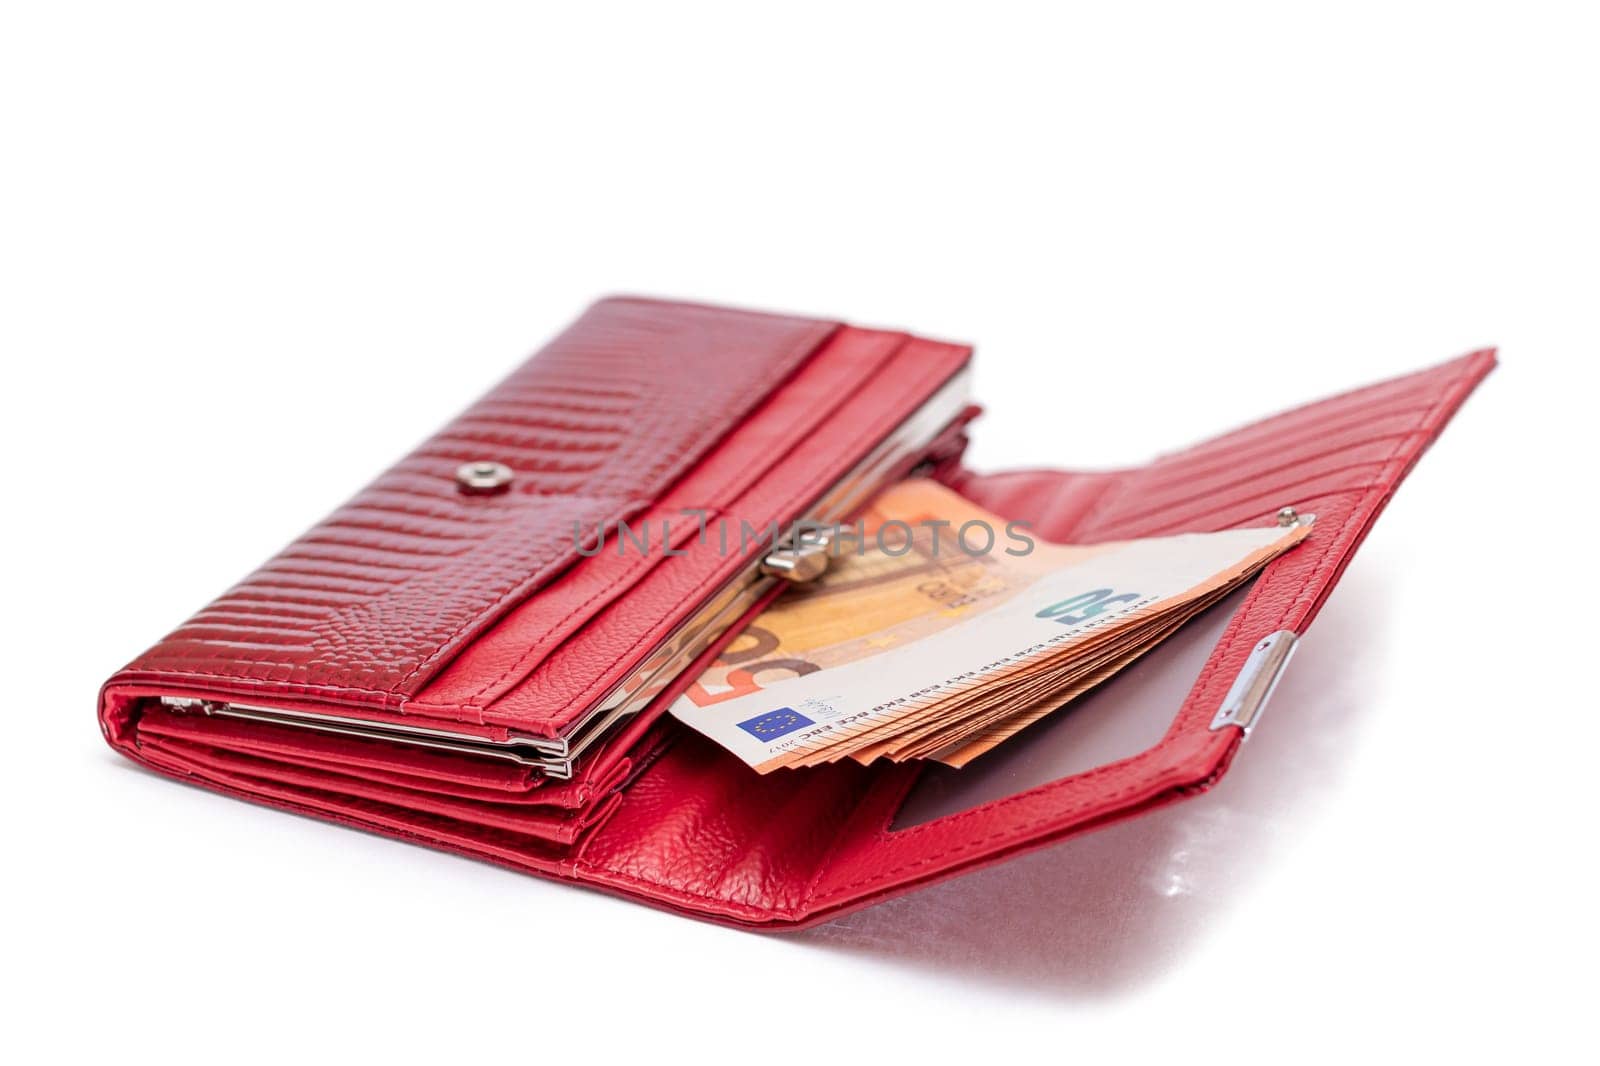 Opened Red Women Purse with 50 Euro Banknotes Inside - Isolated on White by InfinitumProdux